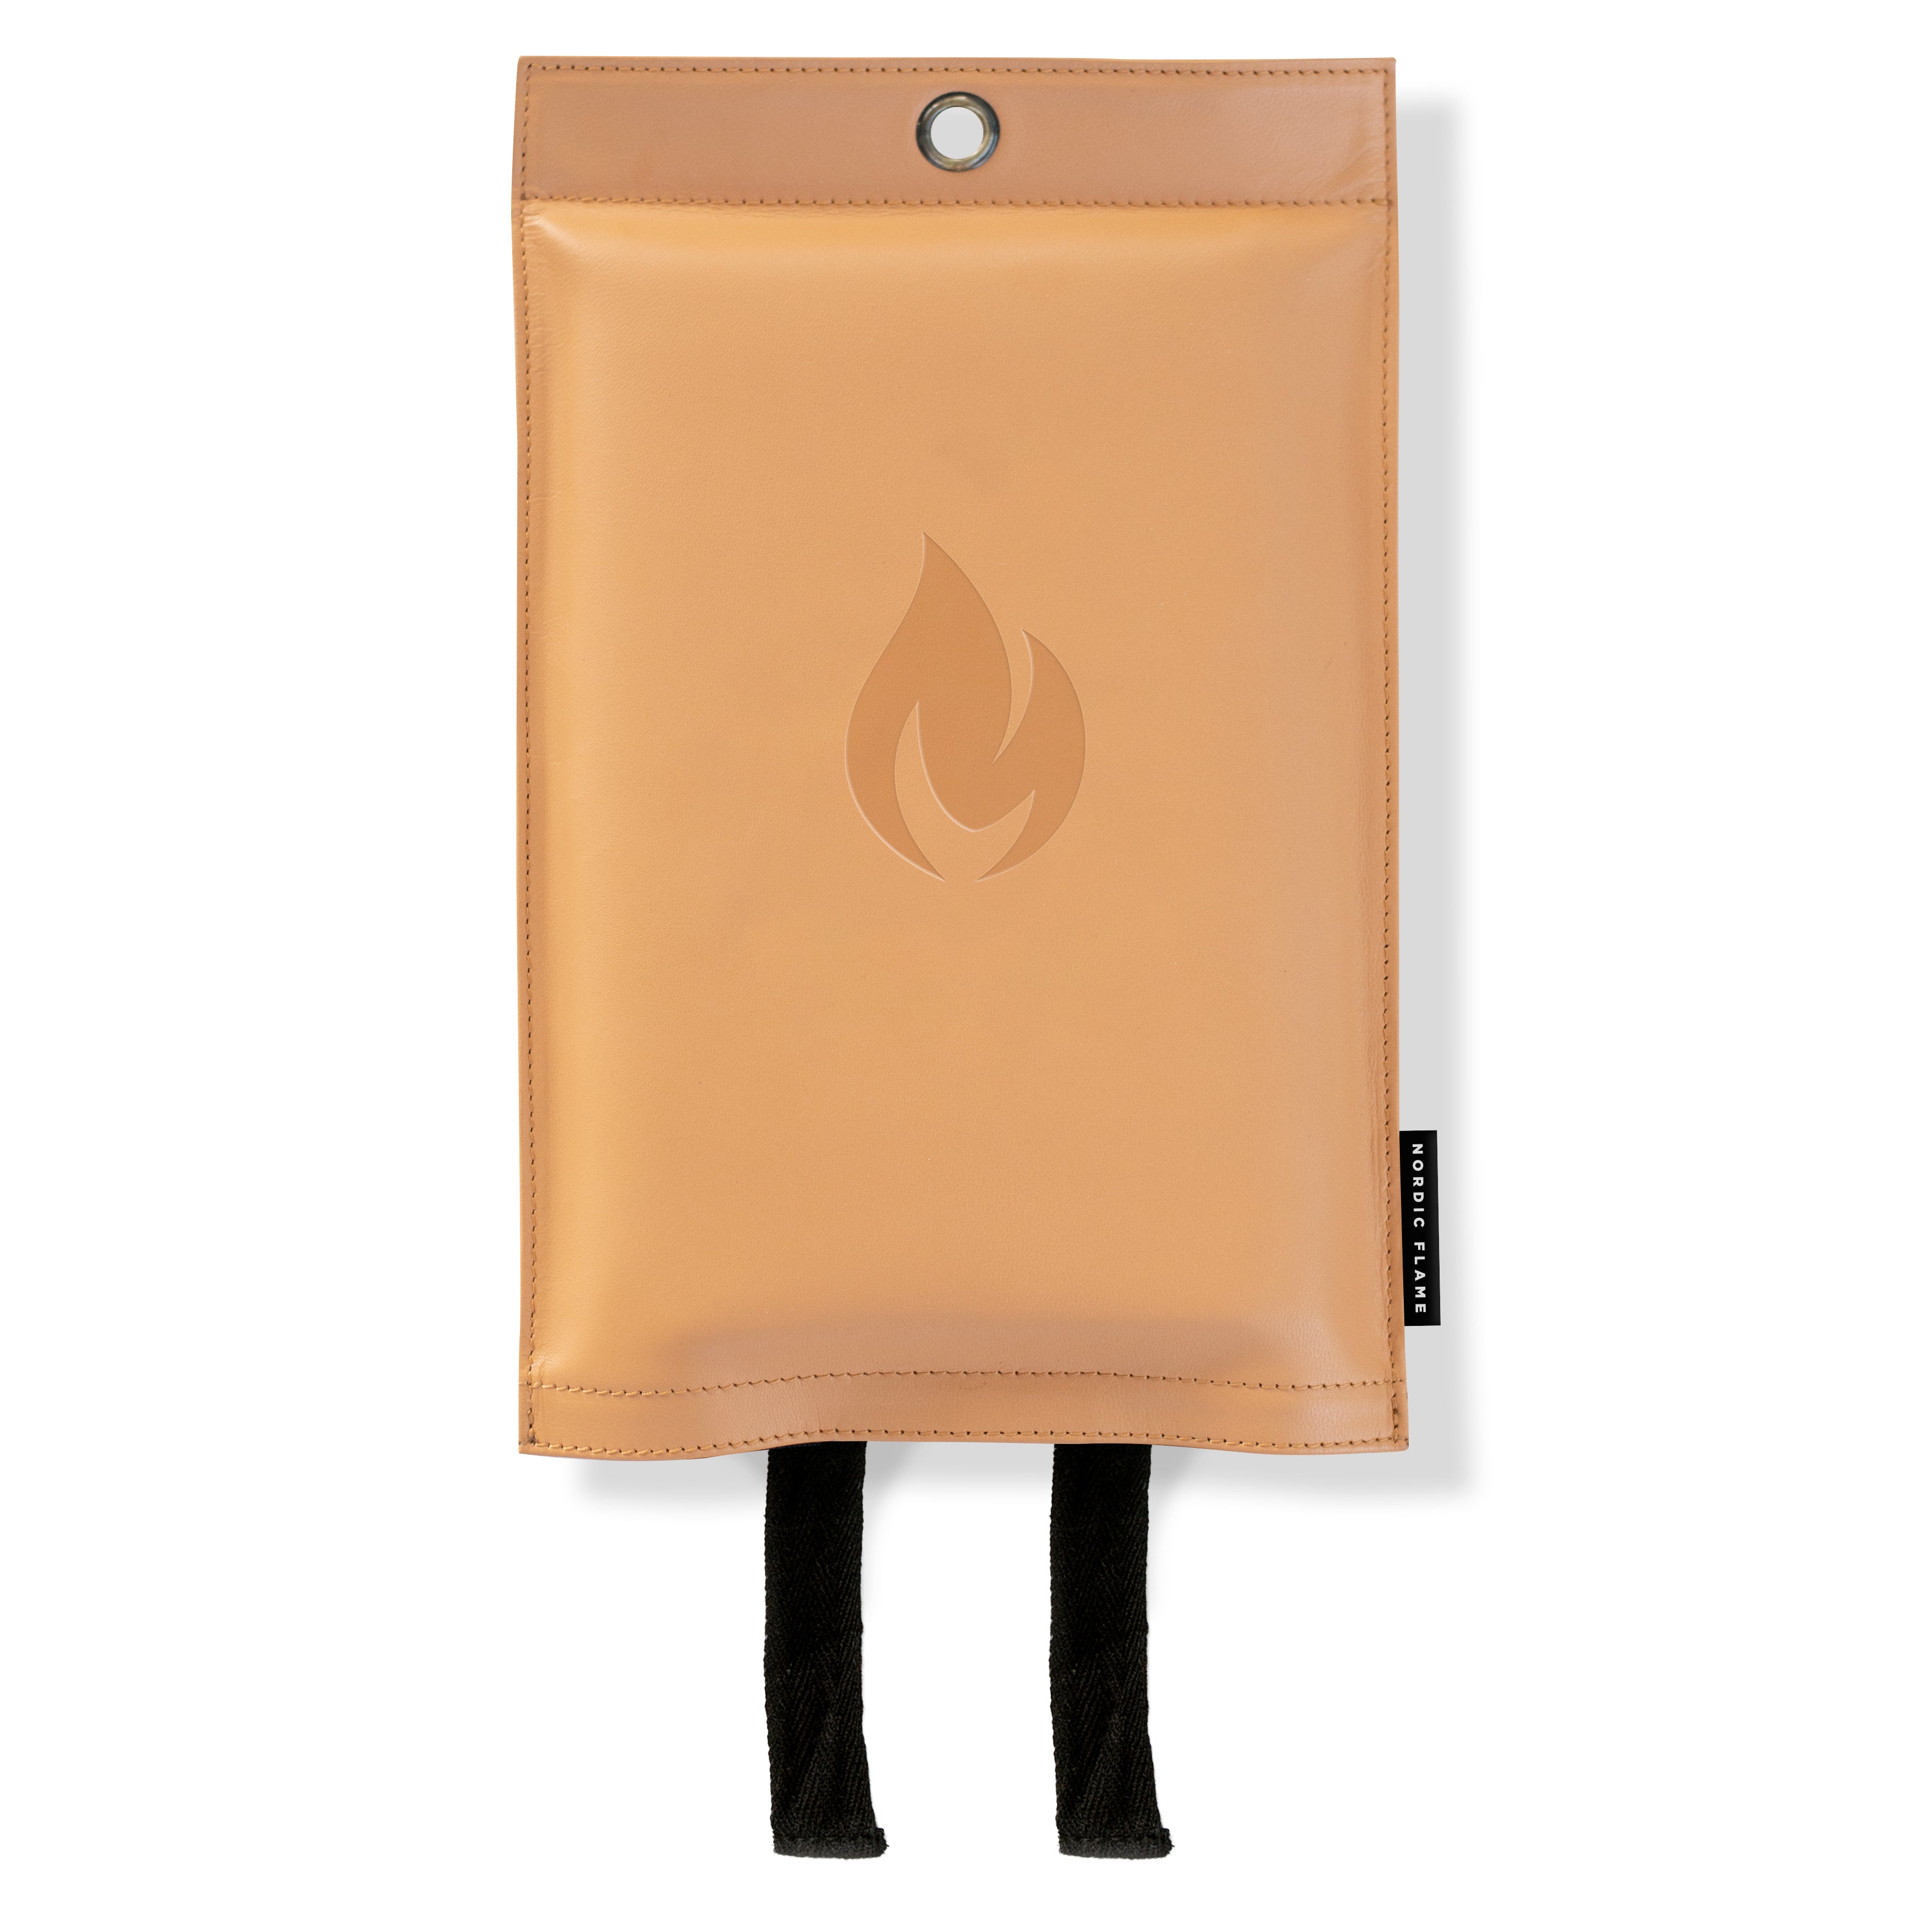 Fire Blanket - Leather light brown